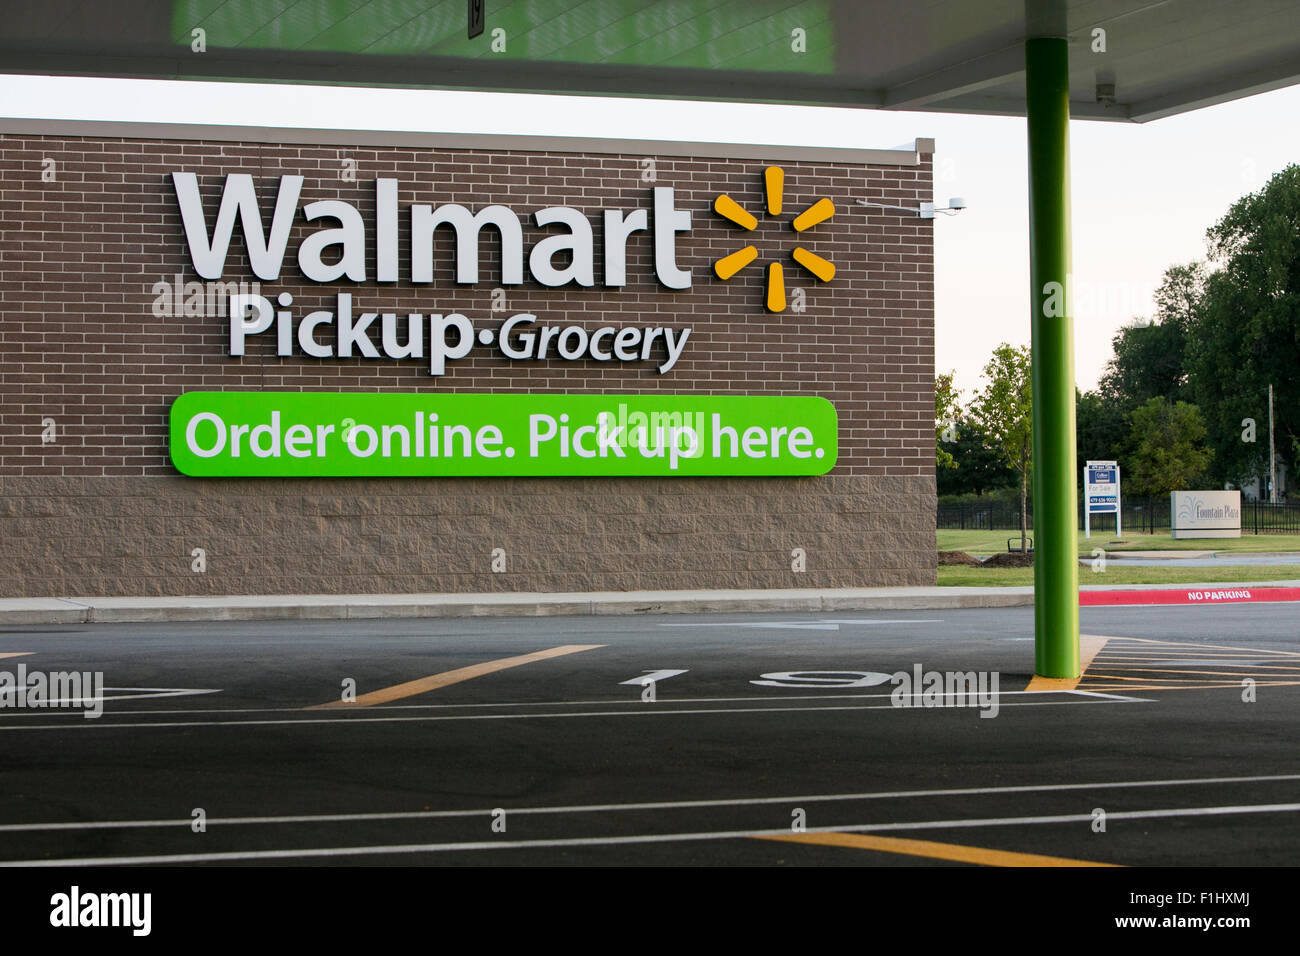 A logo sign outside of a Walmart Pickup- Grocery location in Bentonville, Arkansas on August 17, 2015. Stock Photo